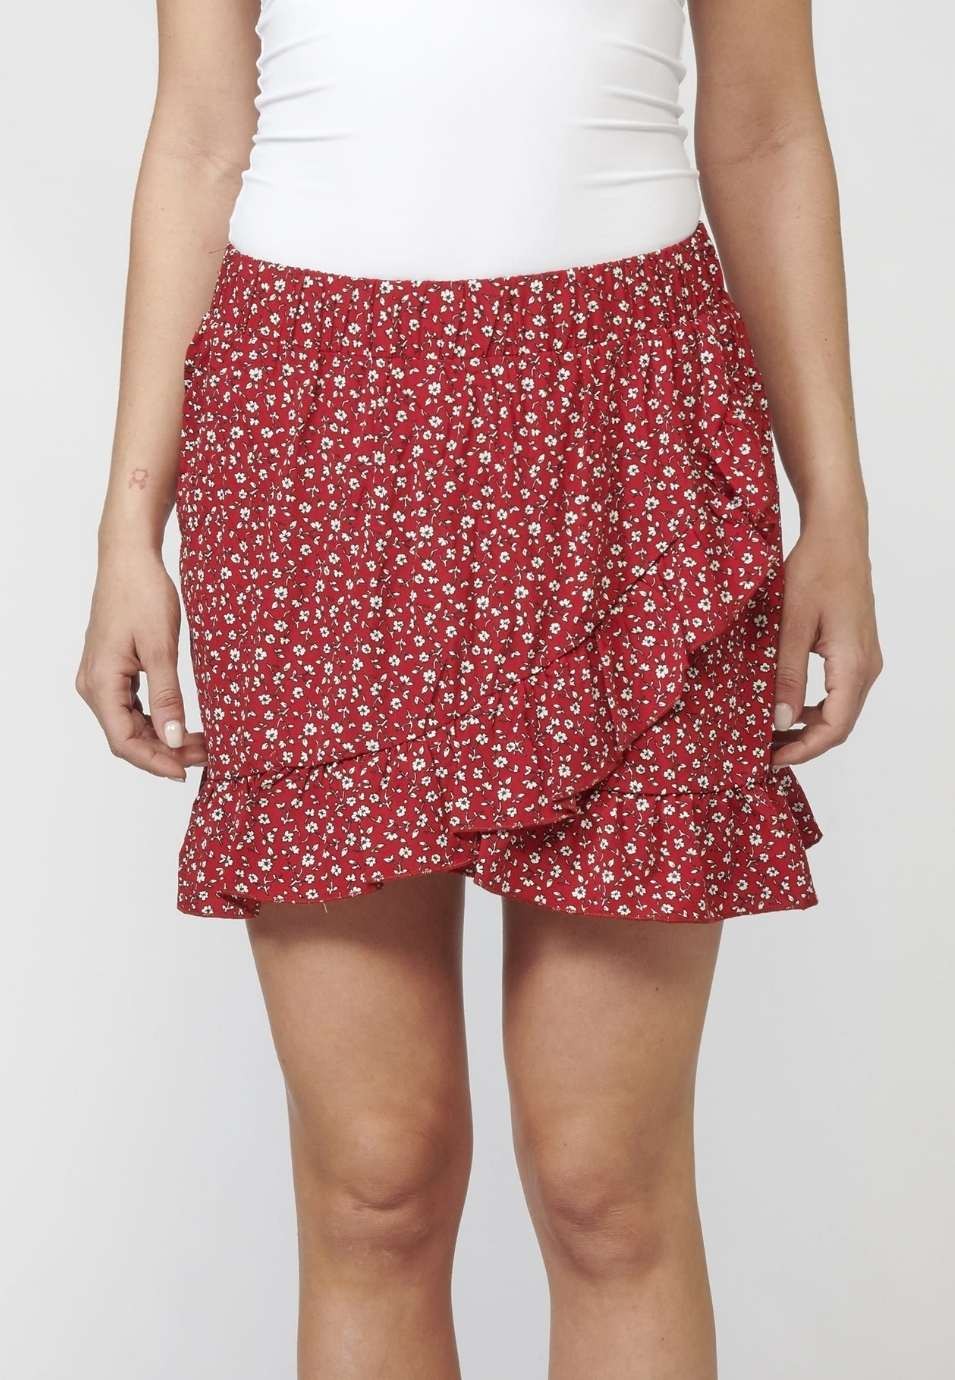 Floral print skirt for Woman Red color 4